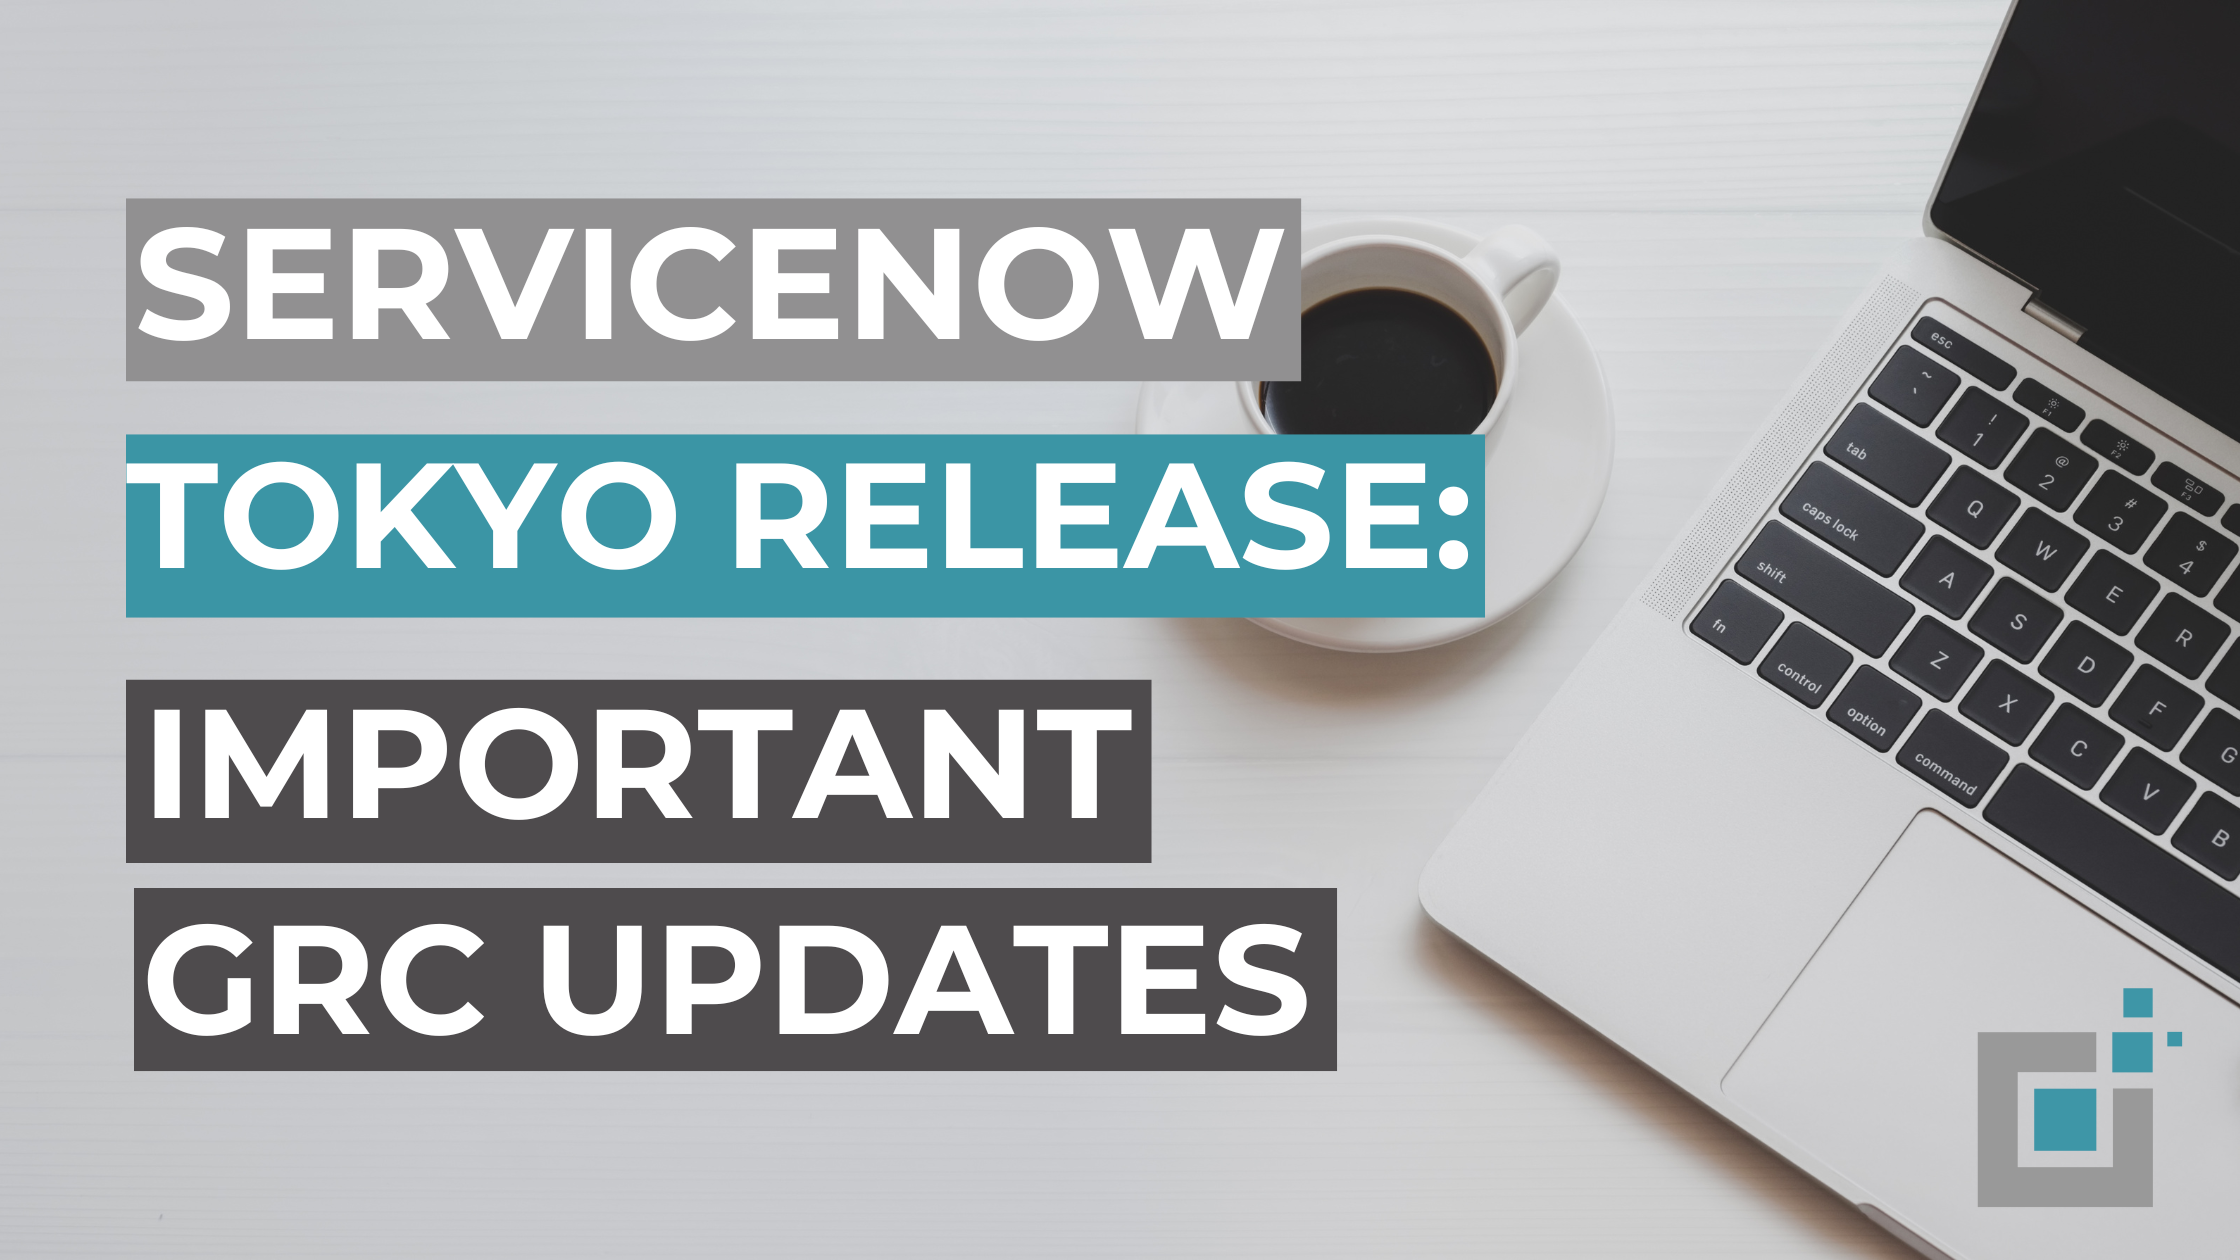 ServiceNow Tokyo Release: Important GRC Updates